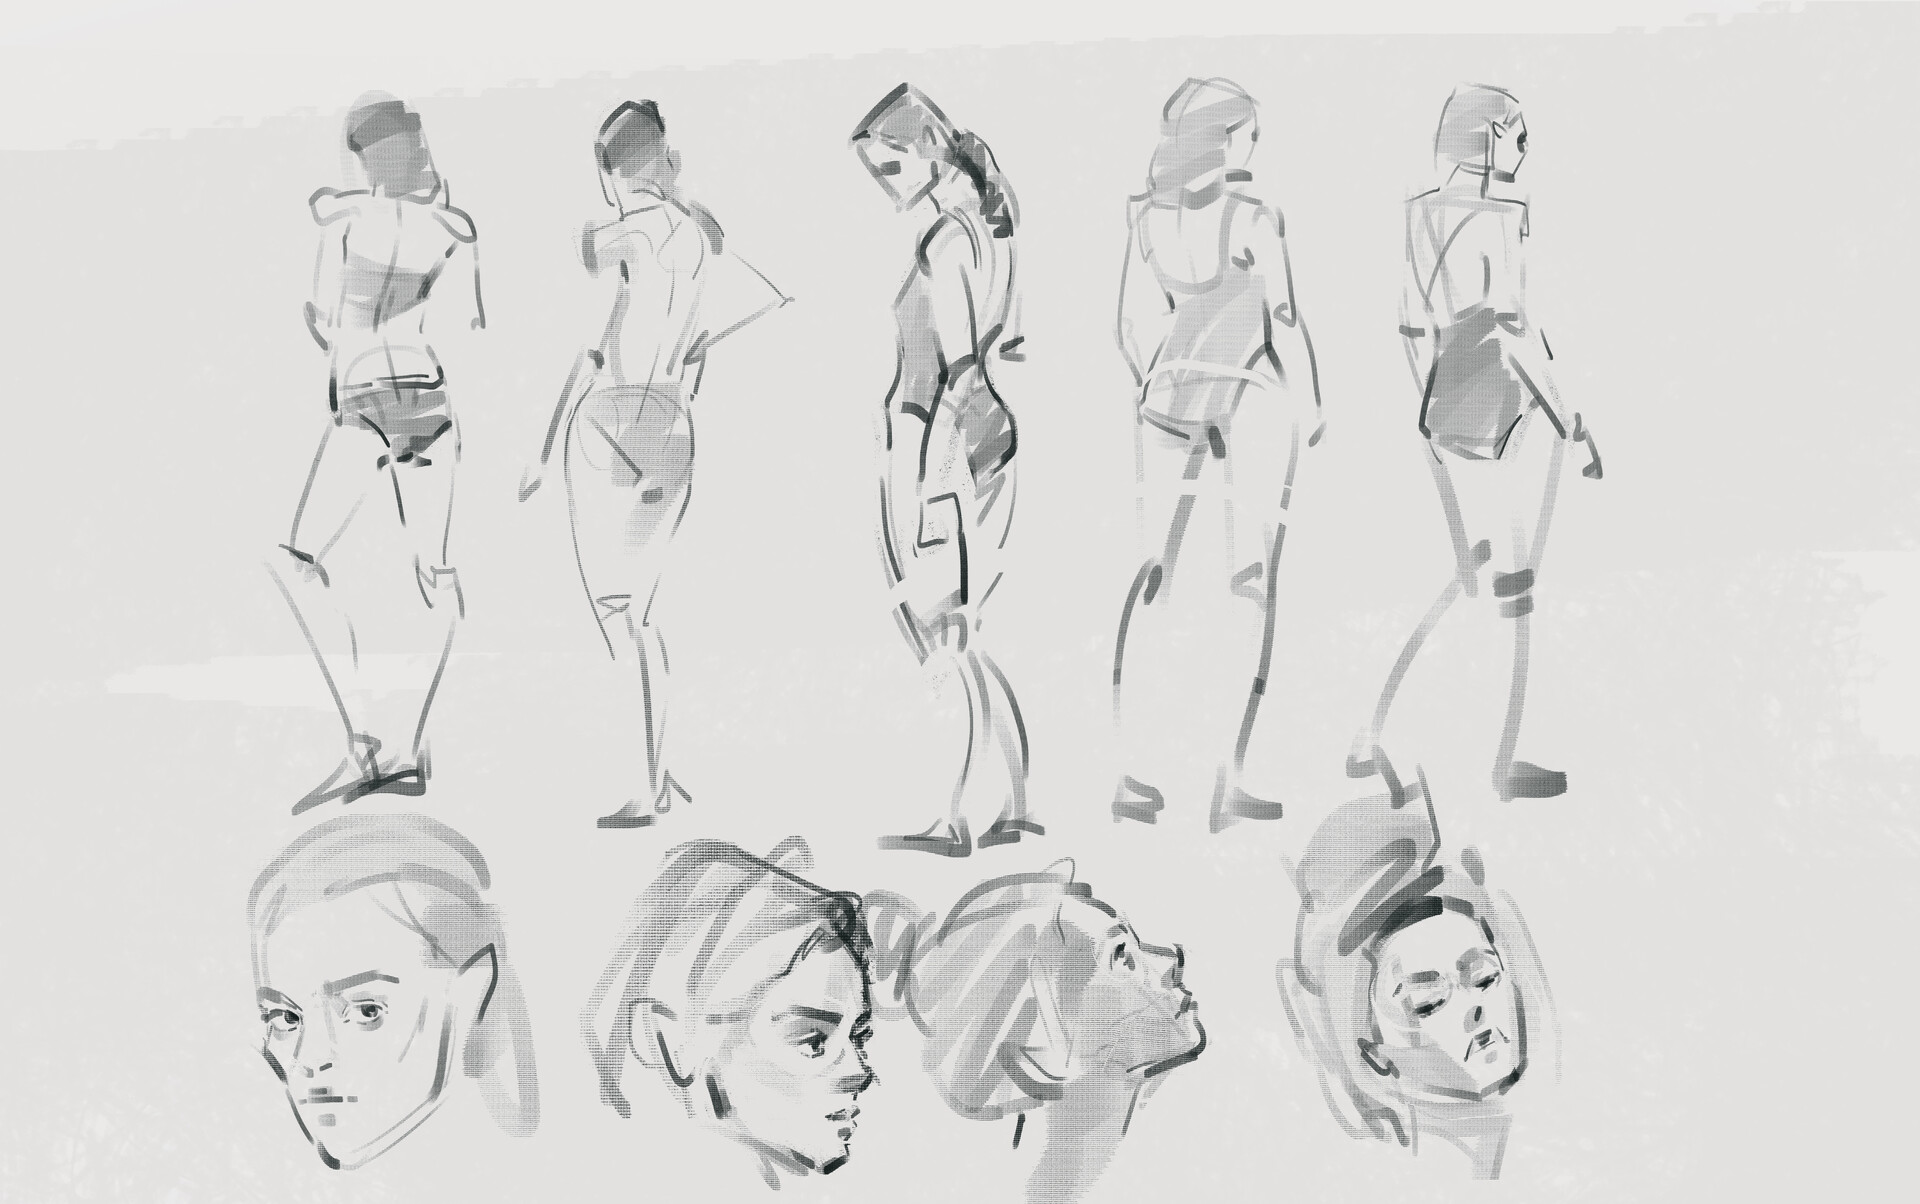 ArtStation - daily sketches ( 매일 스케치 )